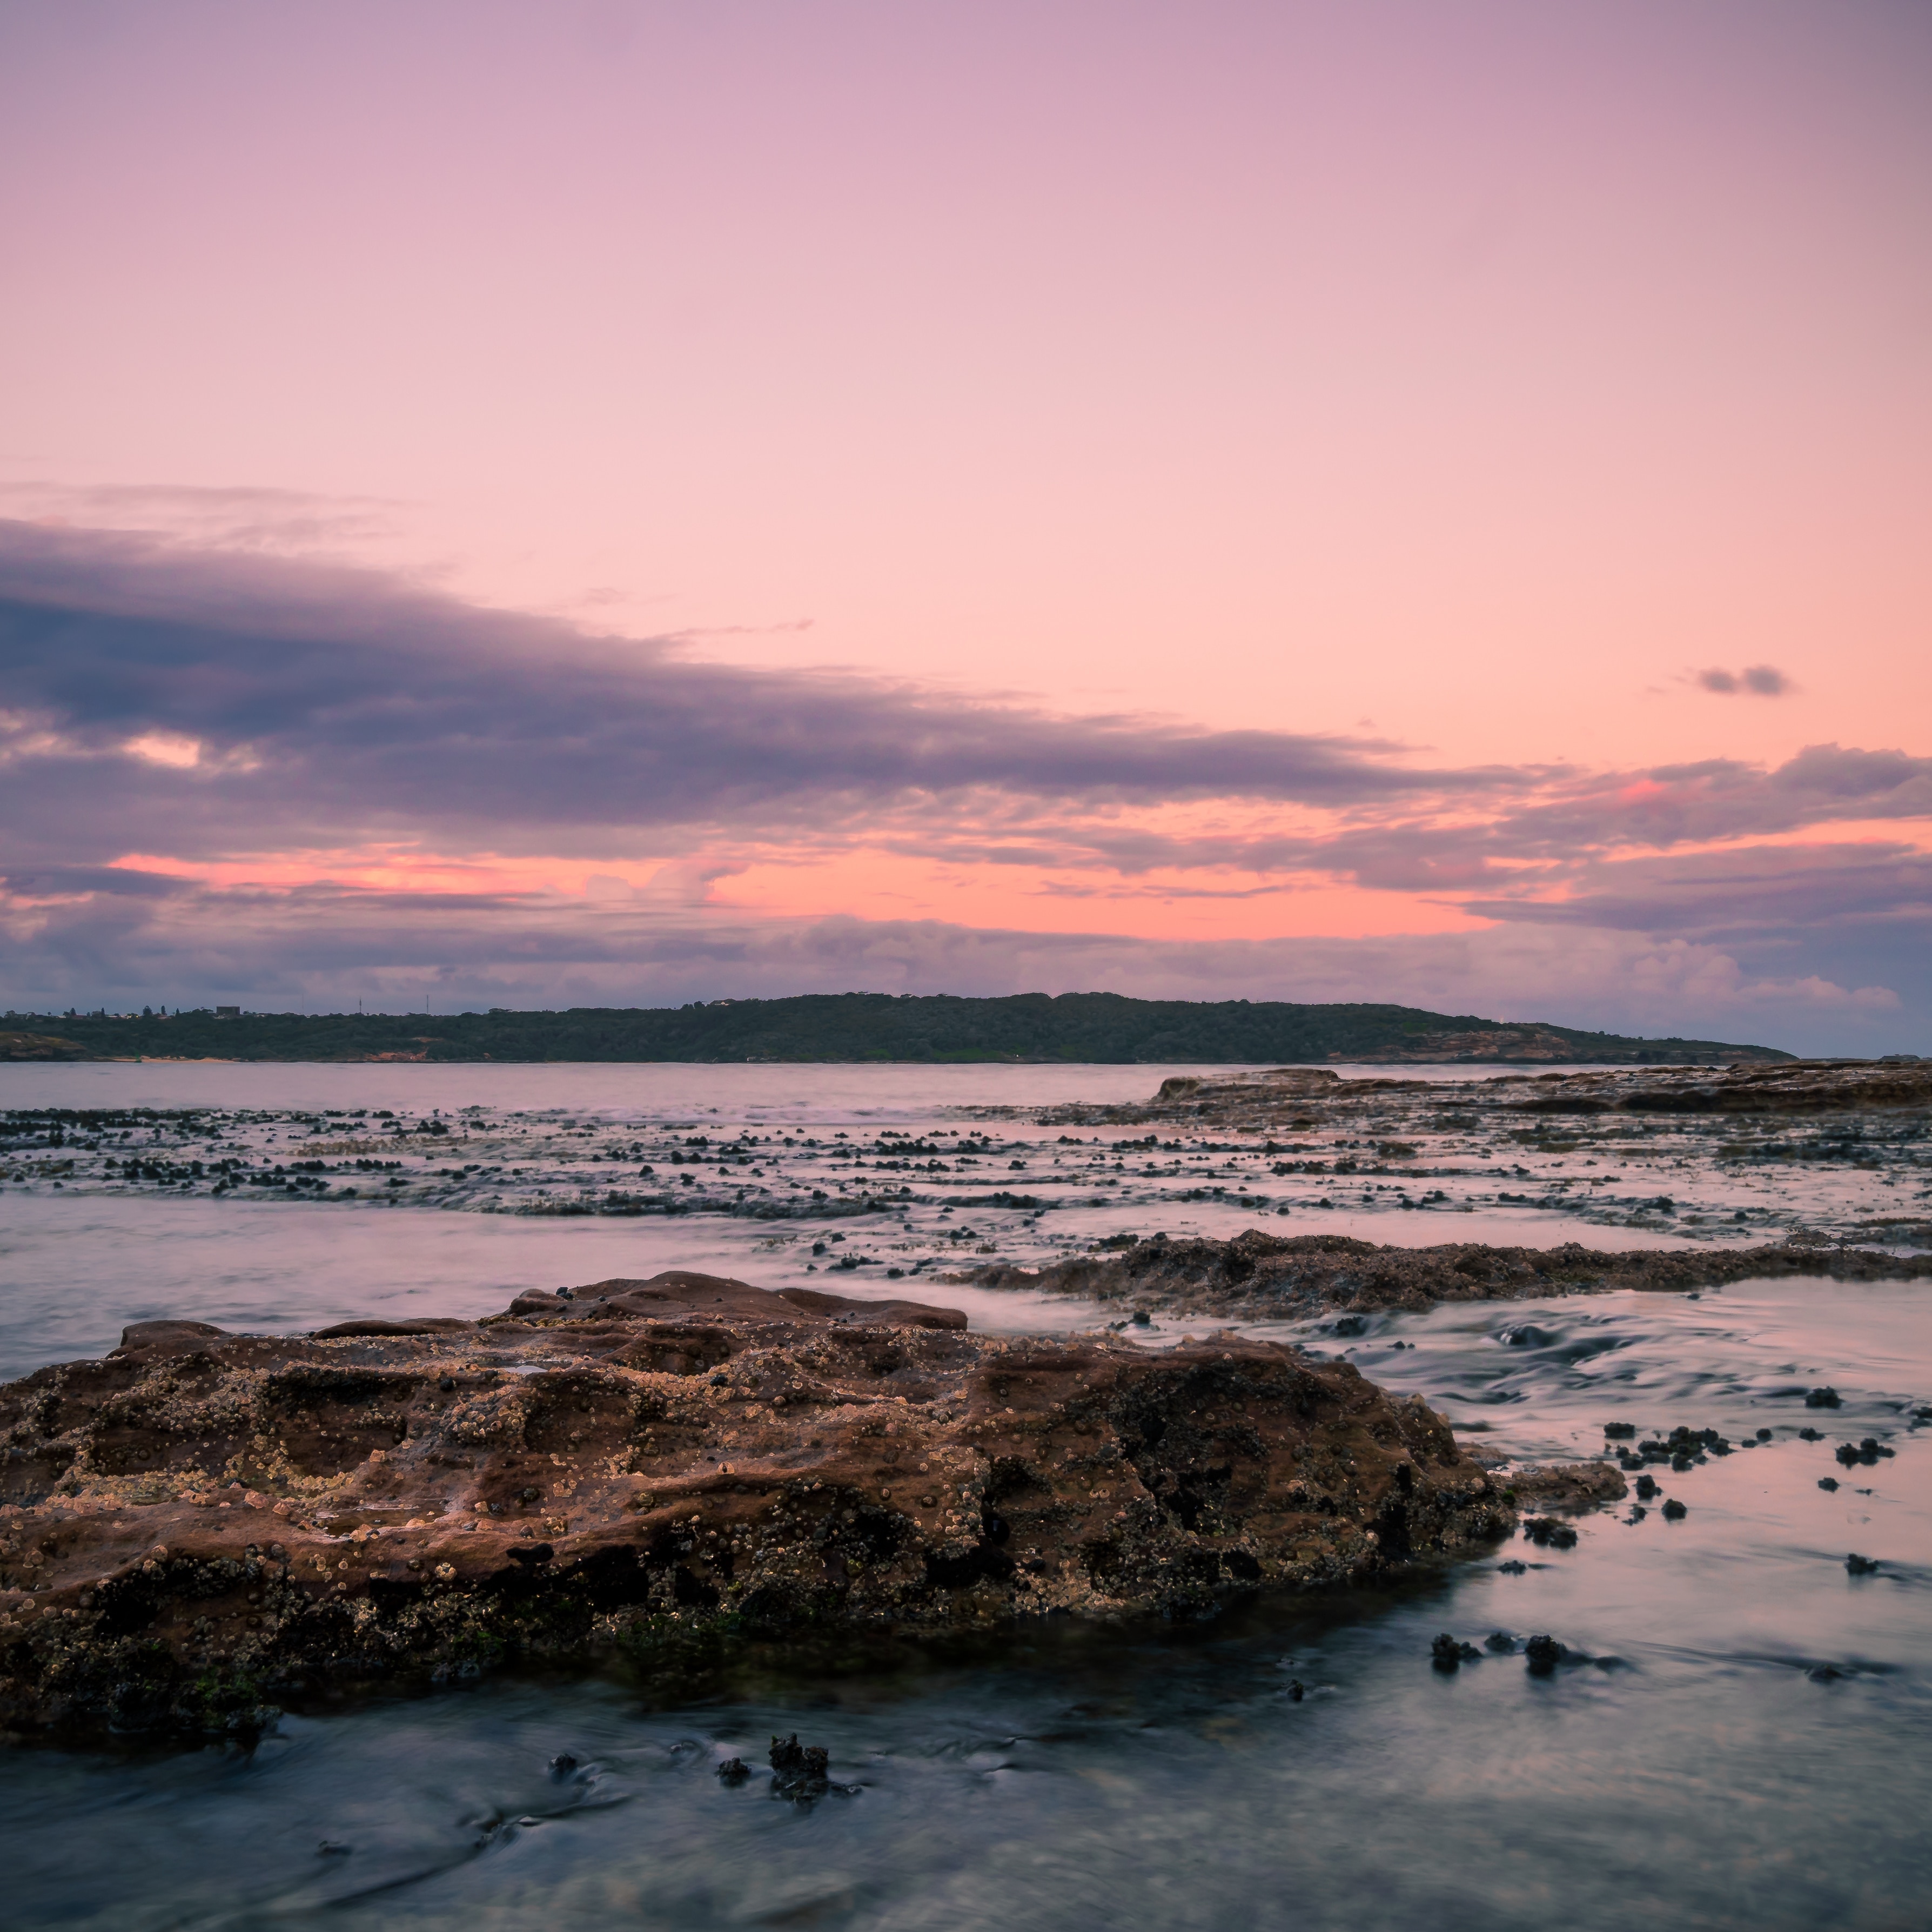 Looking into the sunset at Captain Cook's Landing Place. #sunset #seascape